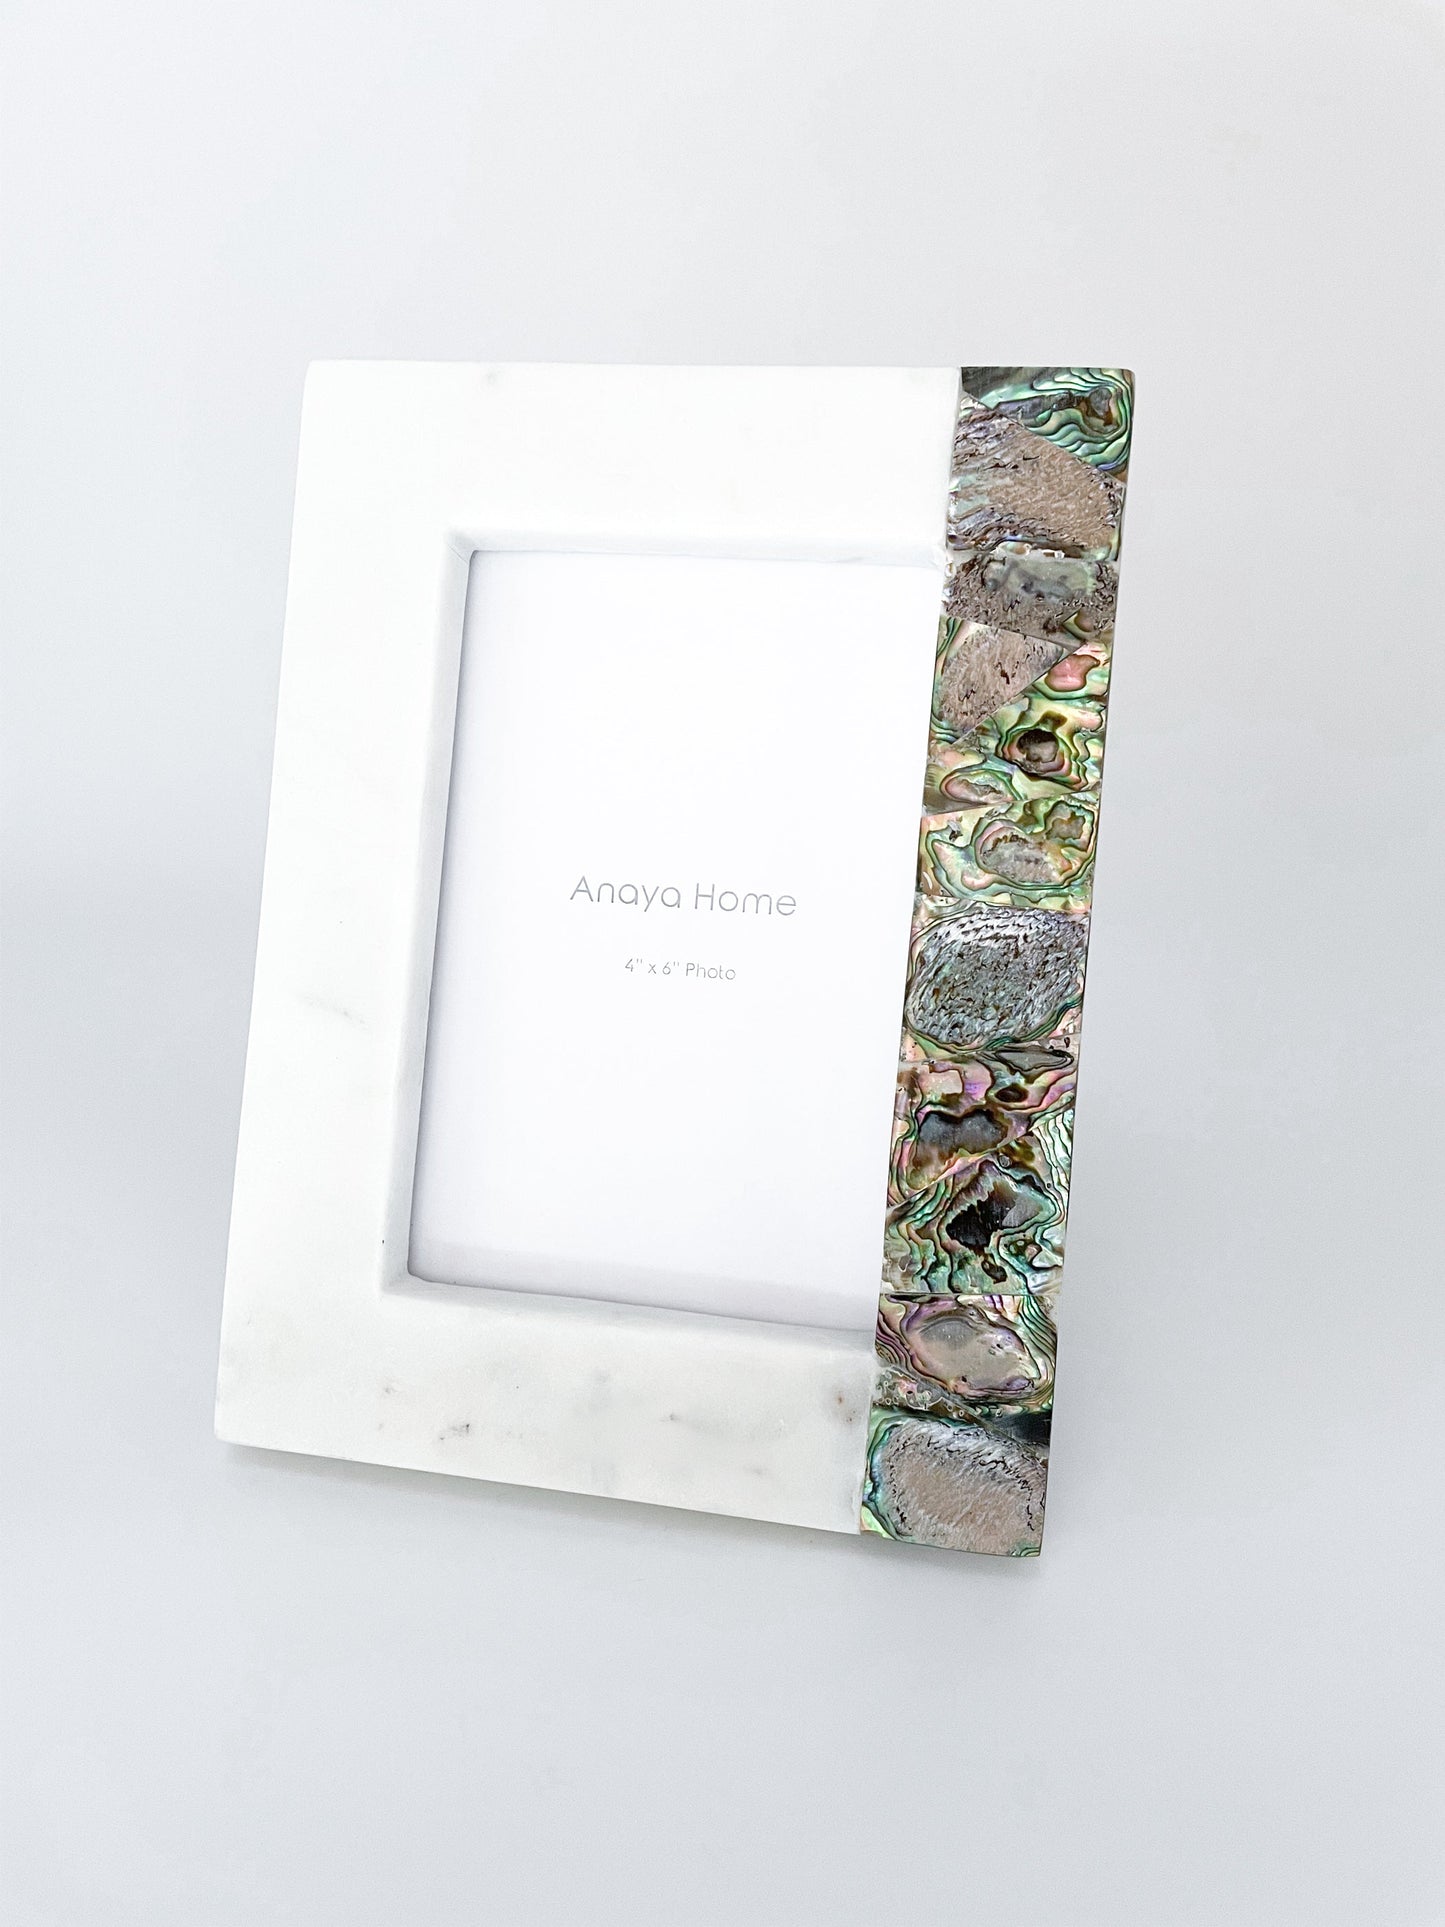 Rainbow Mother of Pearl White Marble Picture Frames by Anaya